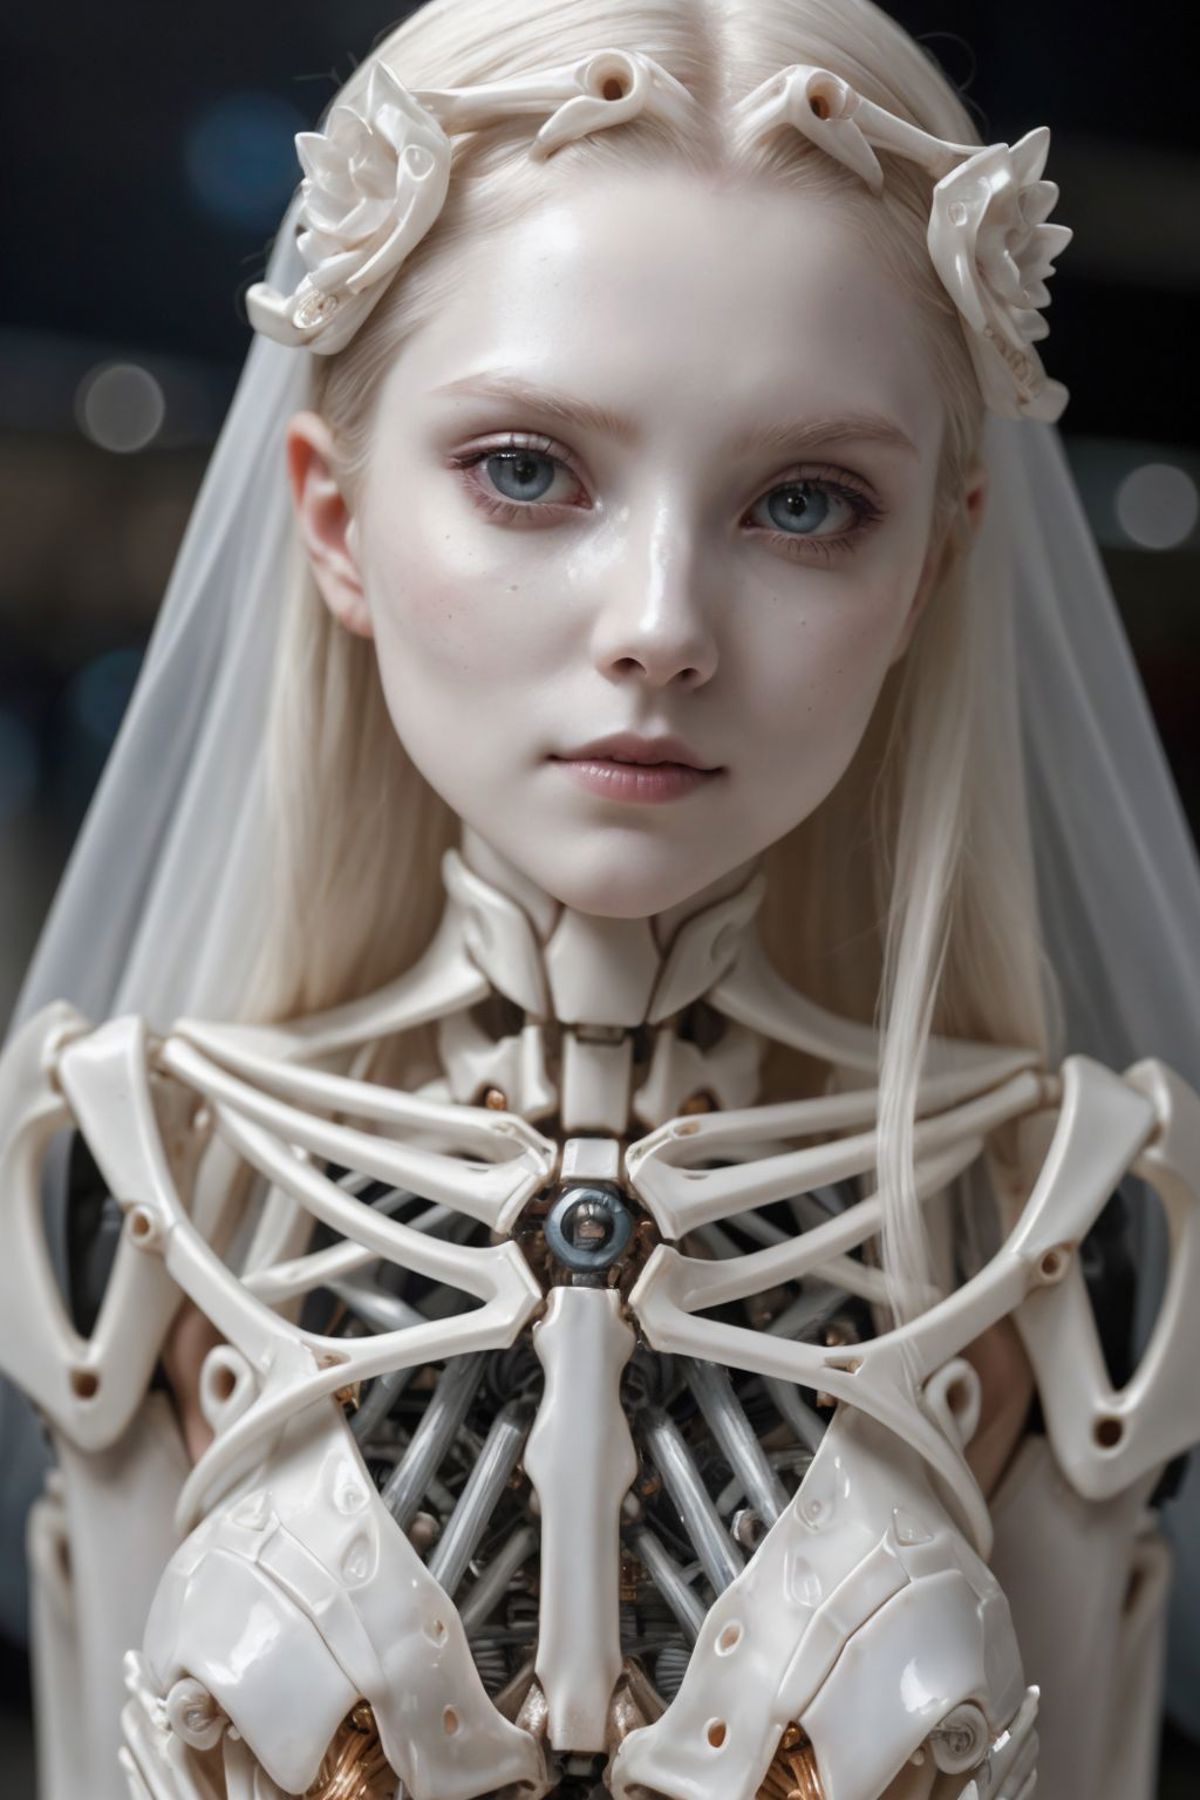 A doll with blue eyes and a white veil on its head.